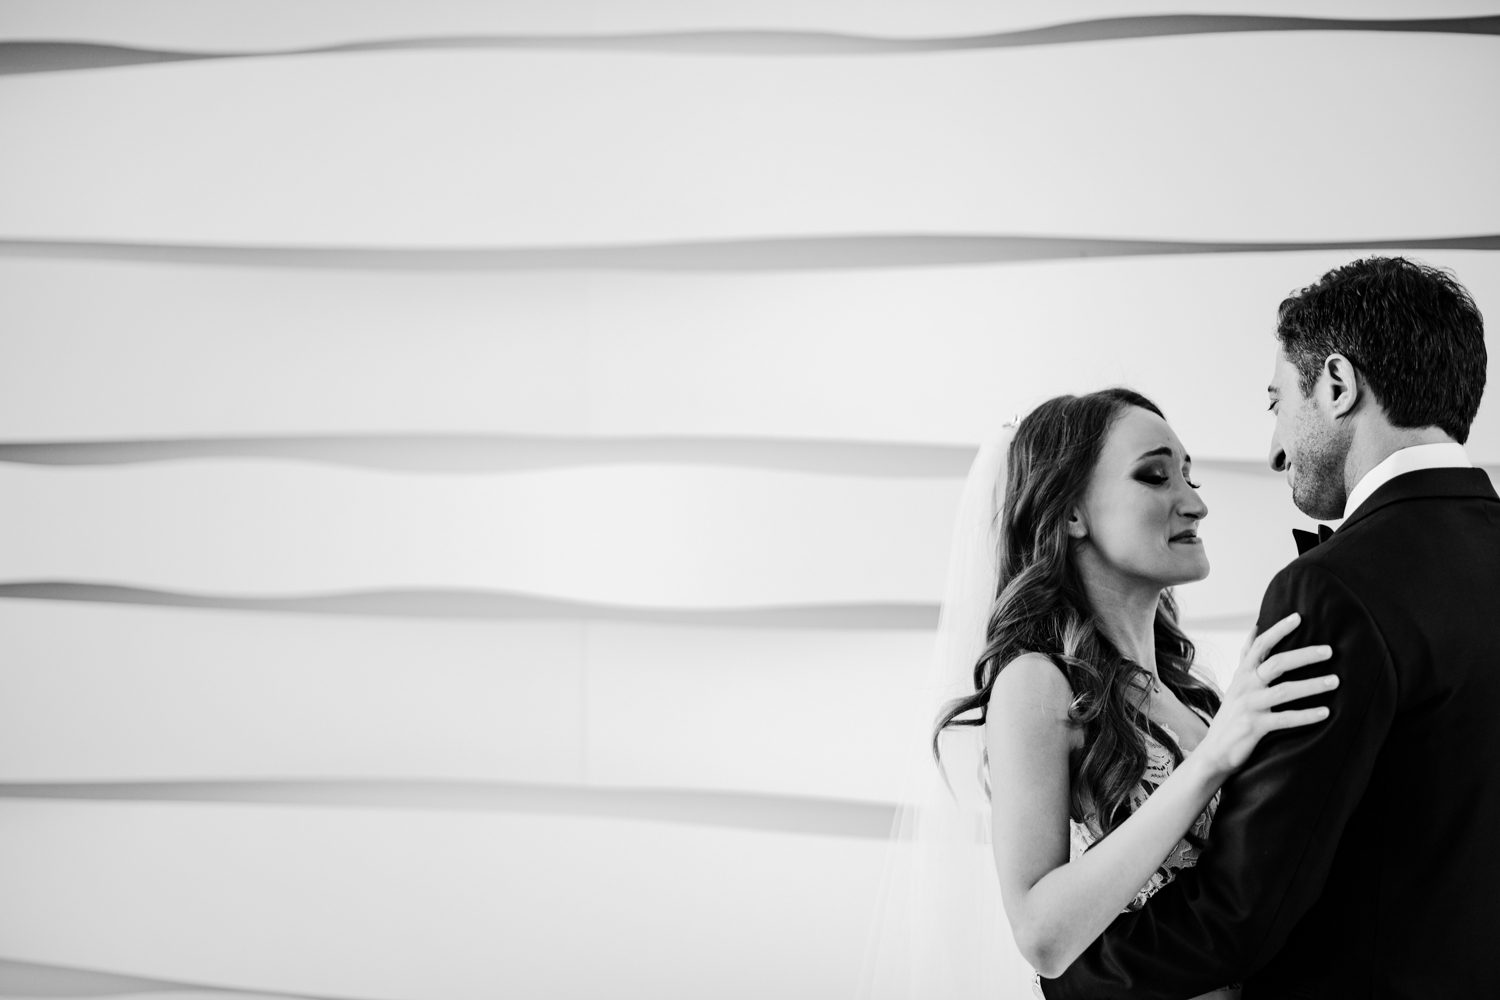 A bride and groom embracing in front of a white wall.